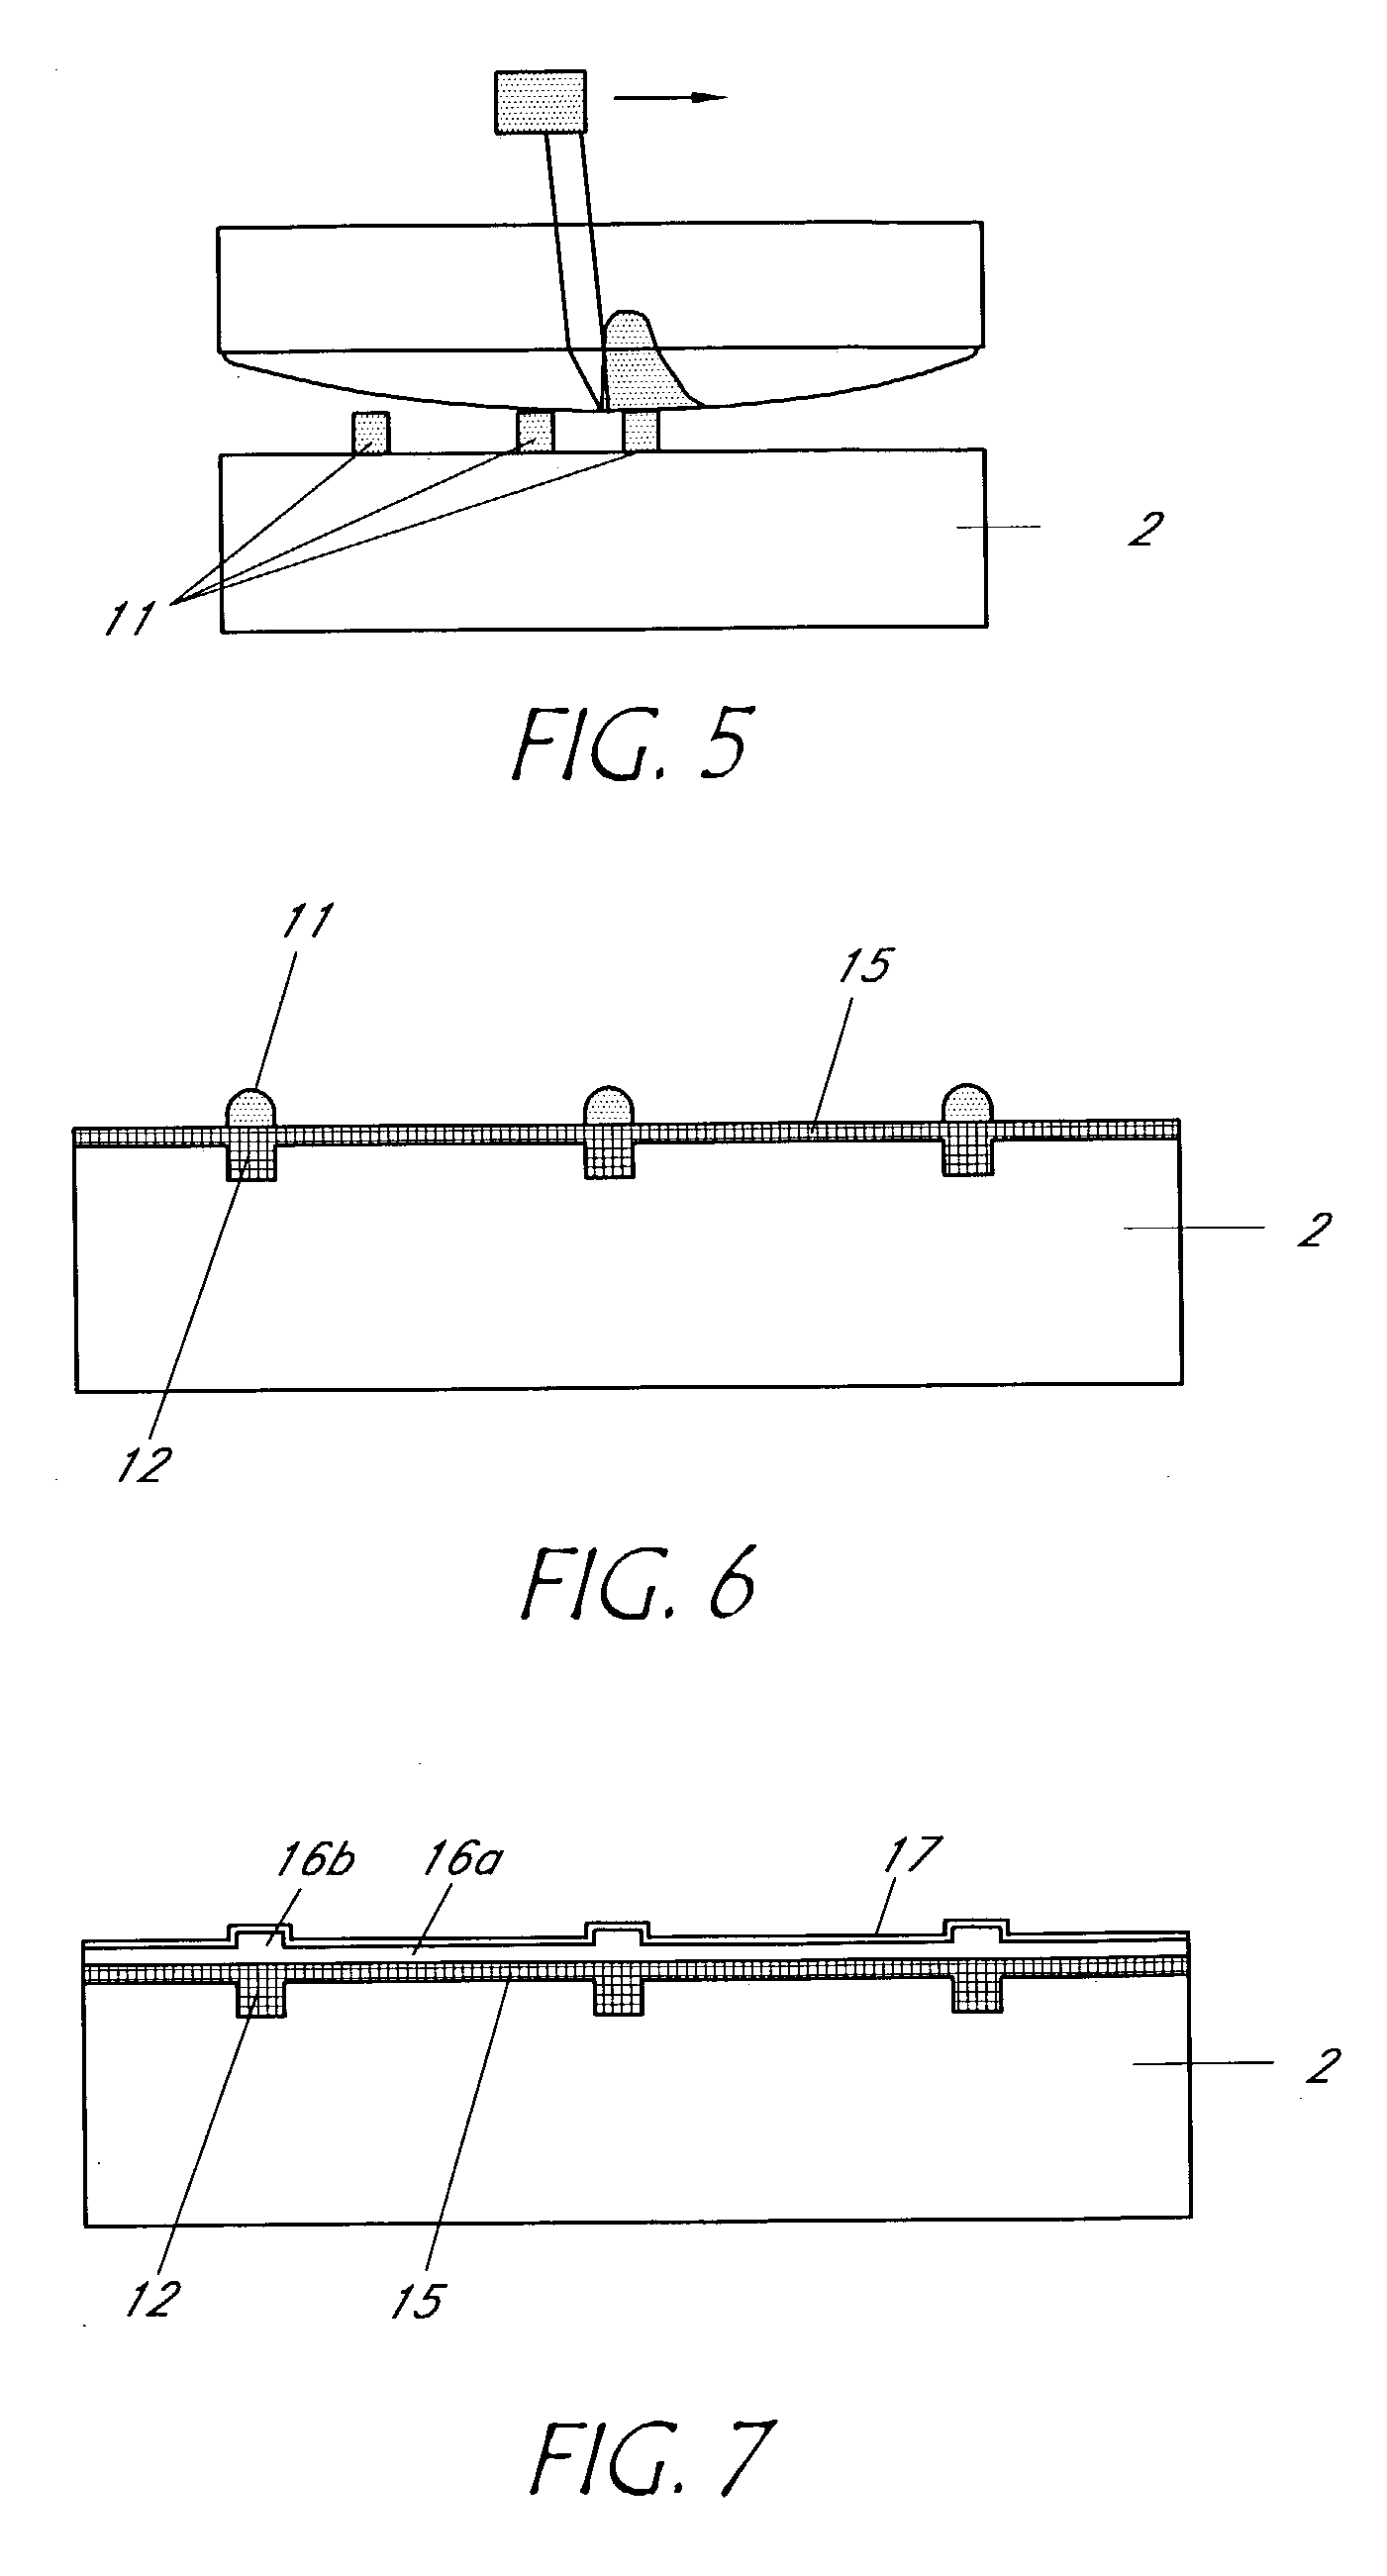 Semiconductor device with selectively diffused regions